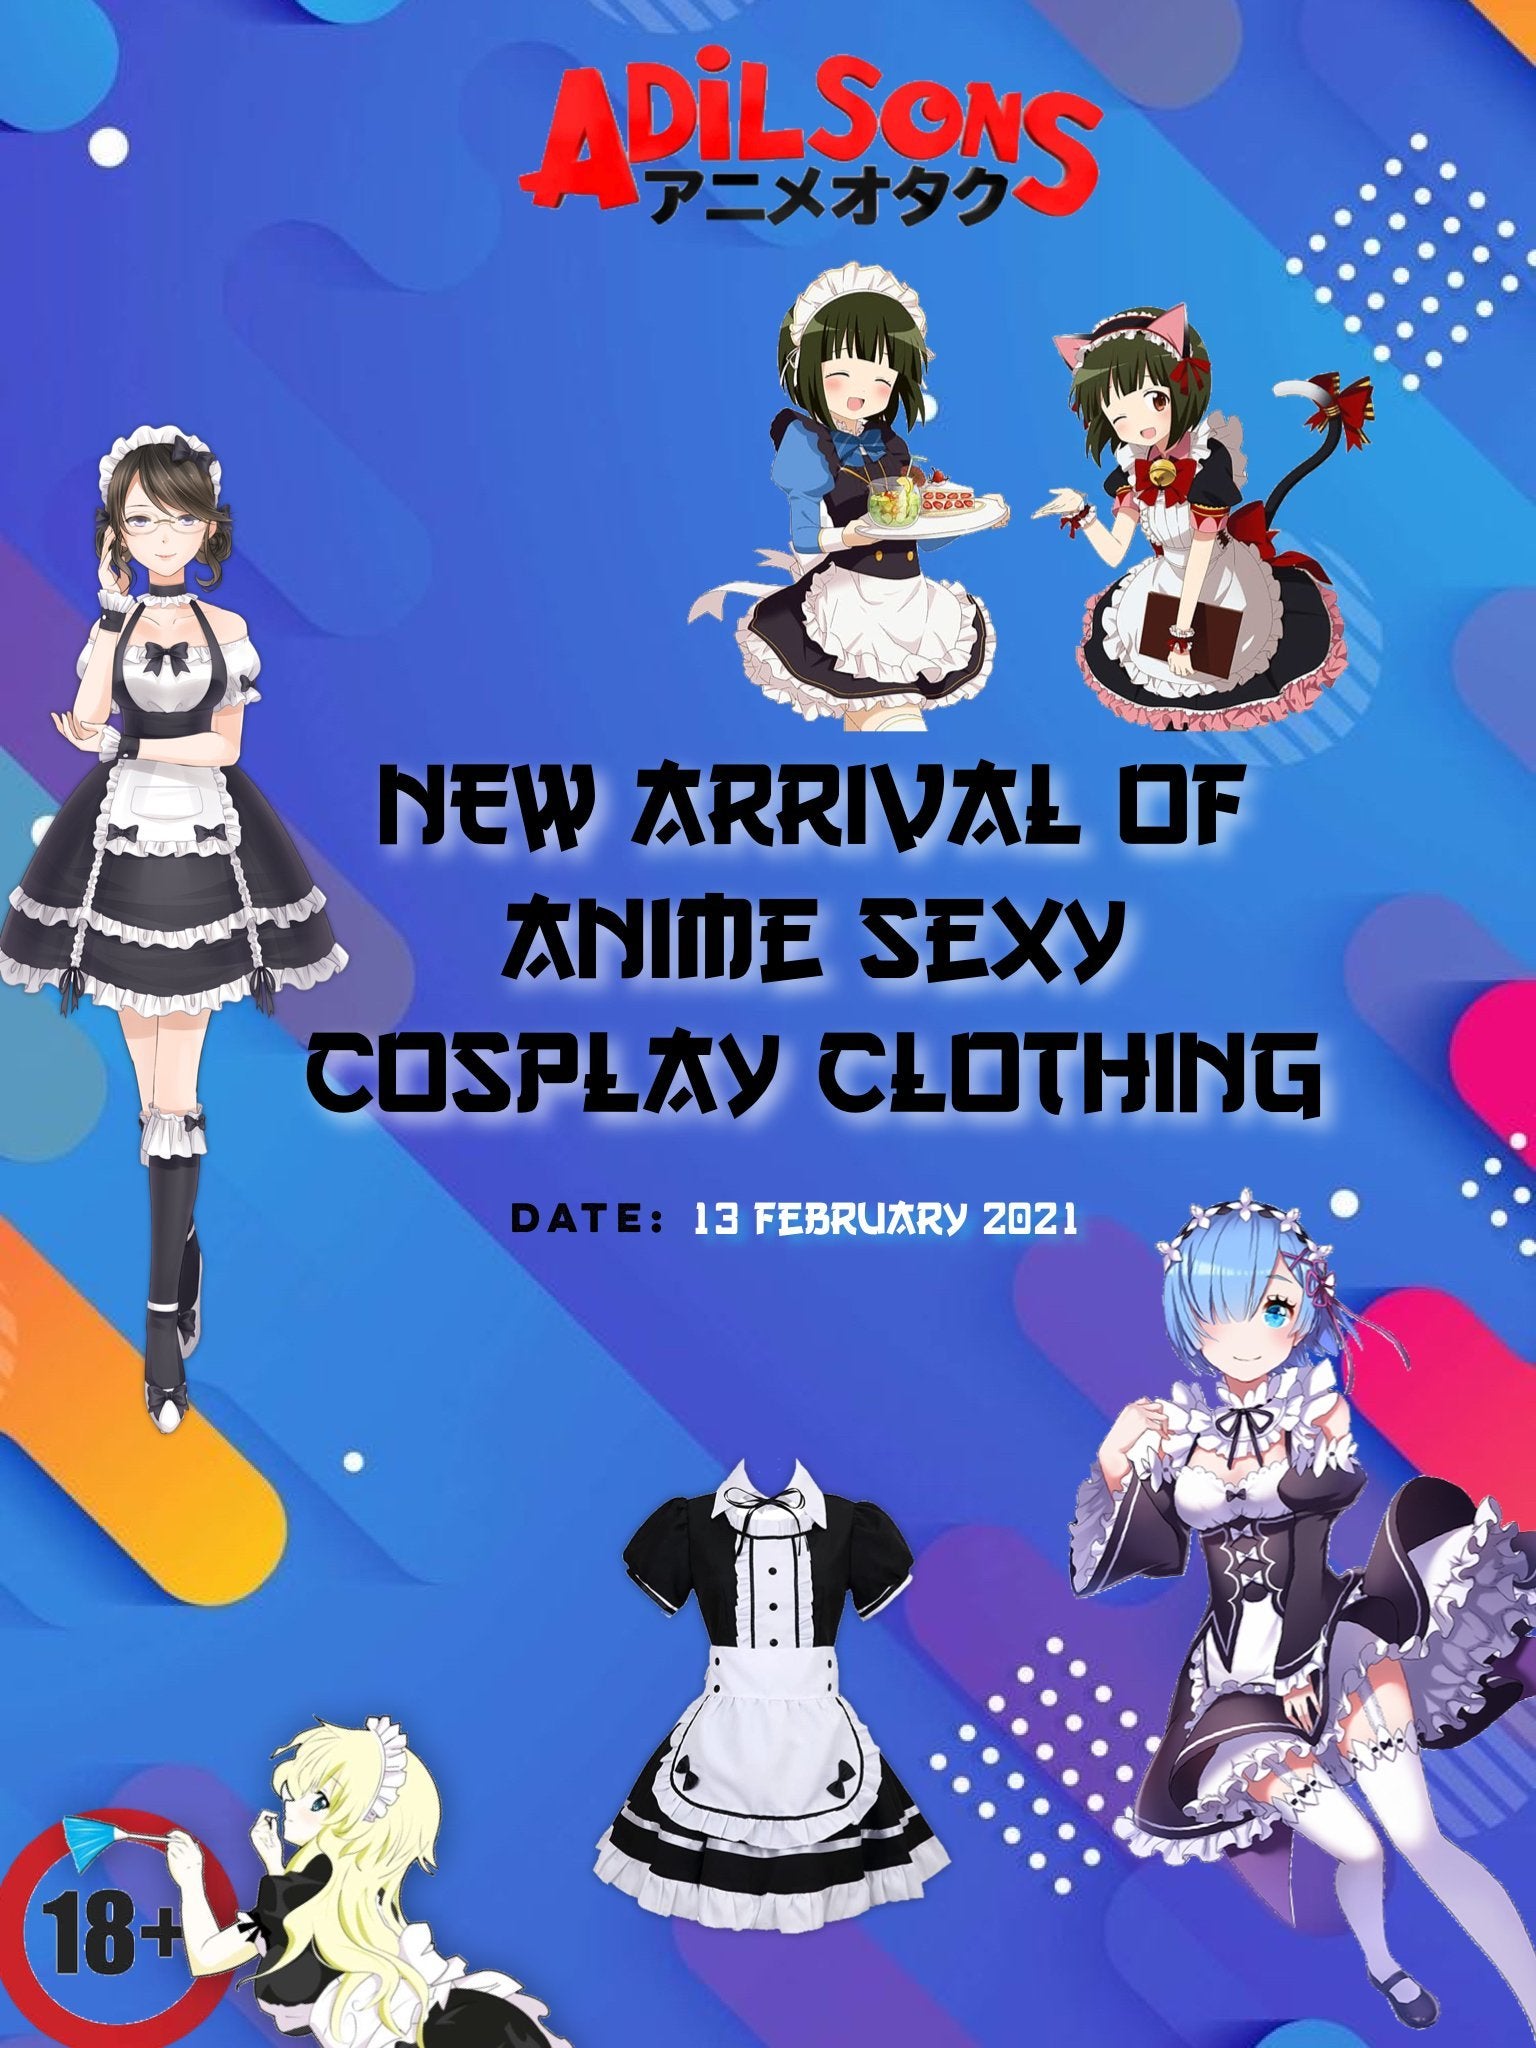 New Arrival of Anime Sexy Cosplay Clothing | Adilsons